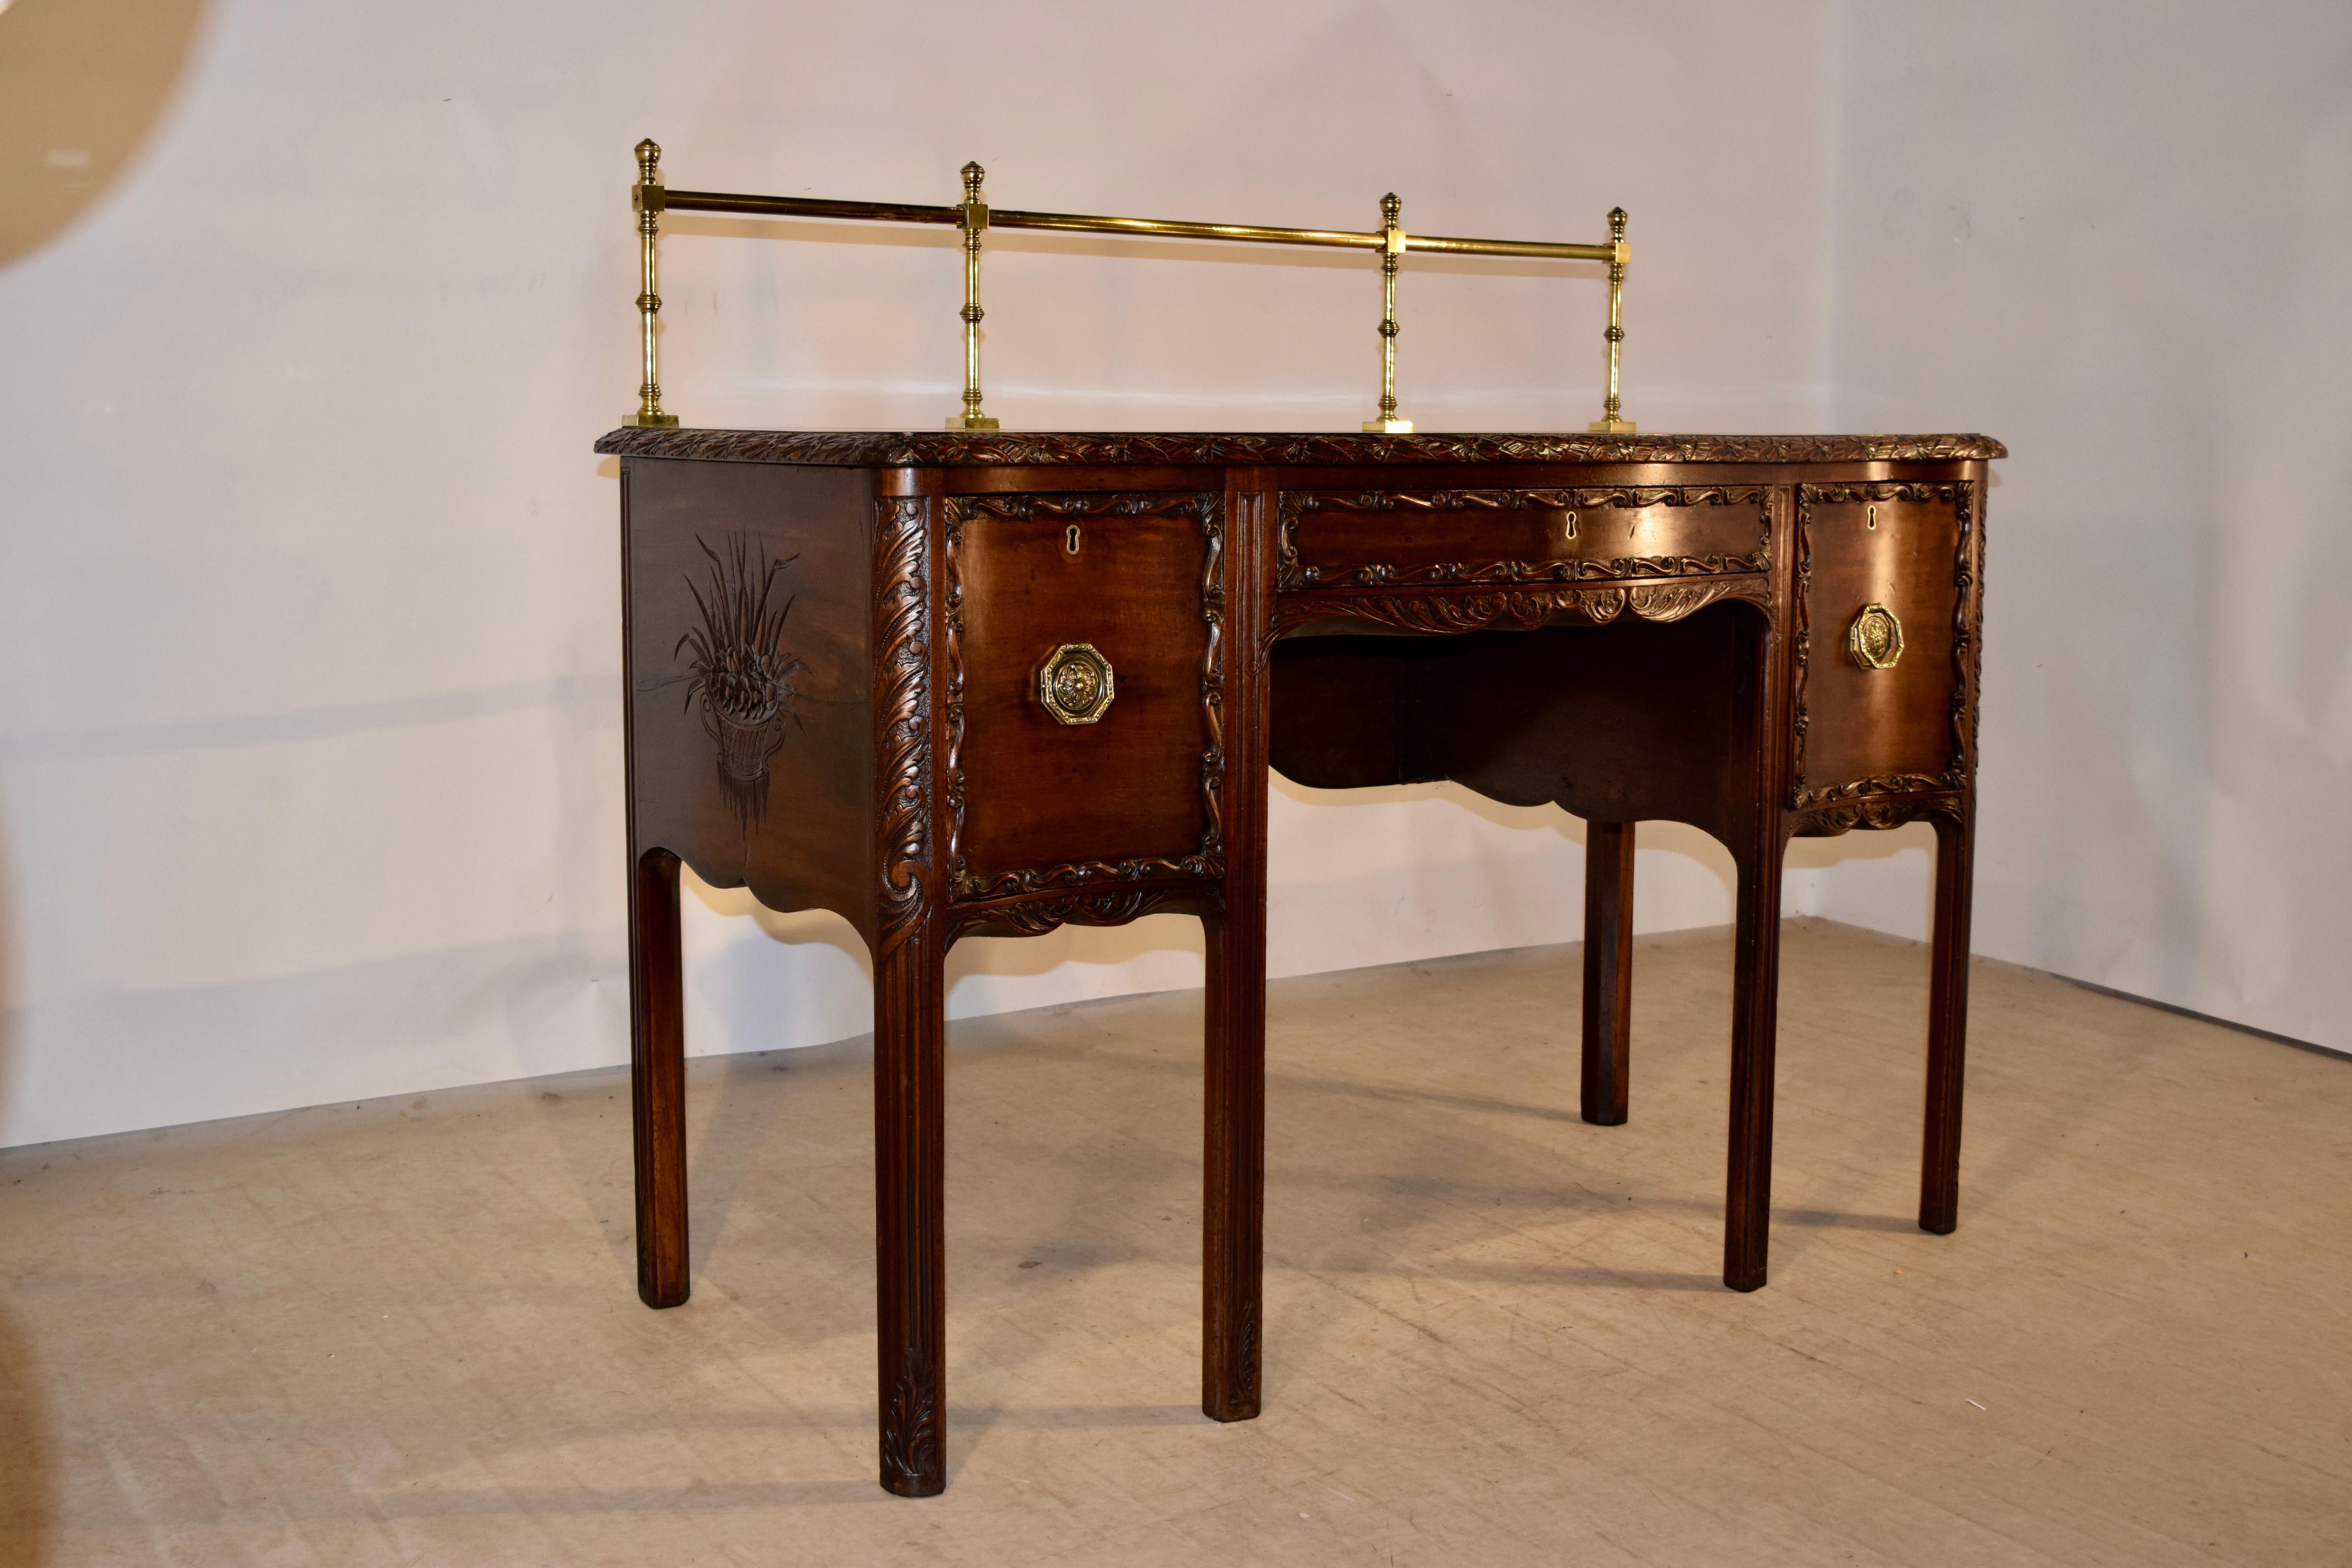 19th century Irish sideboard made from mahogany with a lovely hand cast brass decorative railing on the top, following down to a richly grained top with a beveled and hand carved edge depicting ribbons and floral. There is a single drawer flanked by